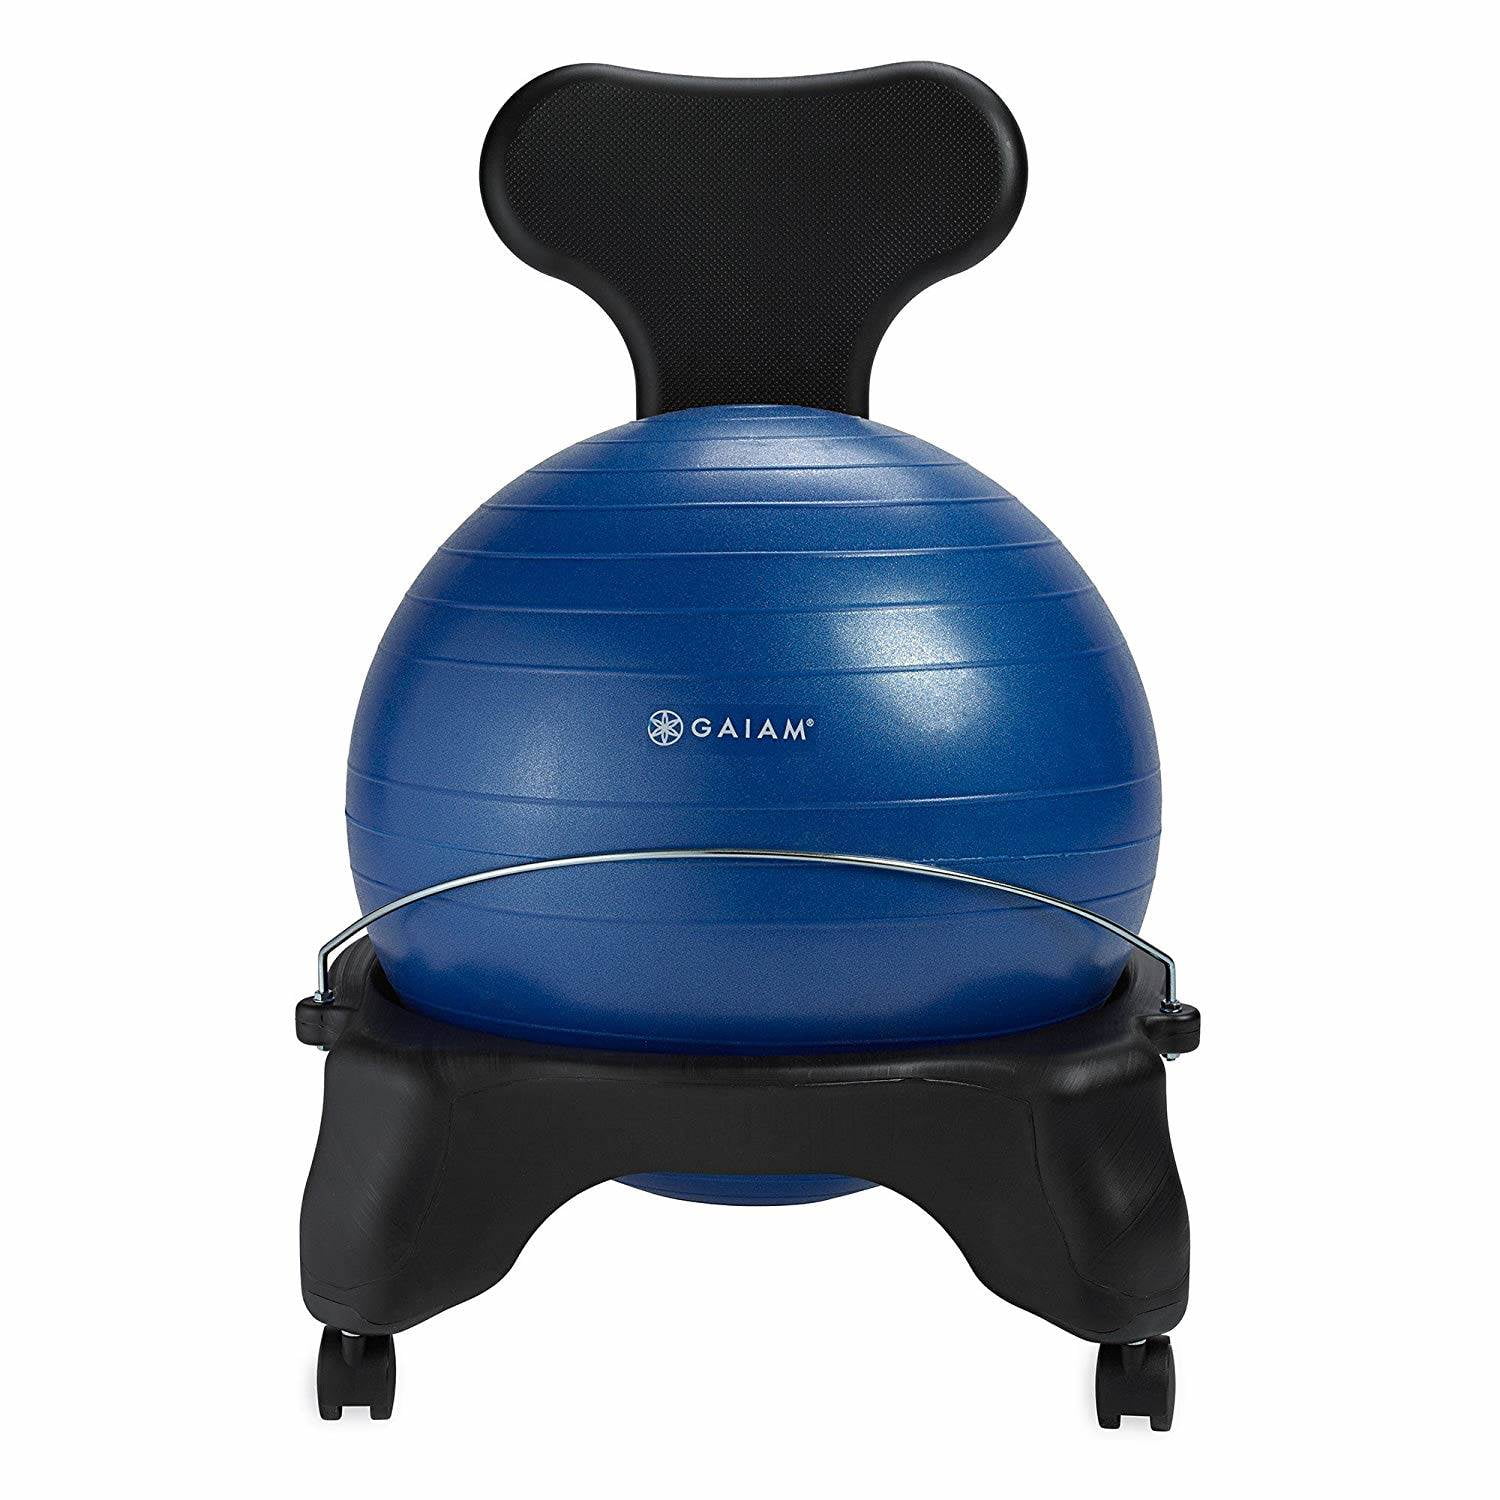 Gaiam Classic Balance Ball Chair Exercise Stability Yoga Ball Premium  Ergonomic Chair for Home and Office Desk with Air Pump, Exercise Guide and  Satisfaction Guarantee Blue 